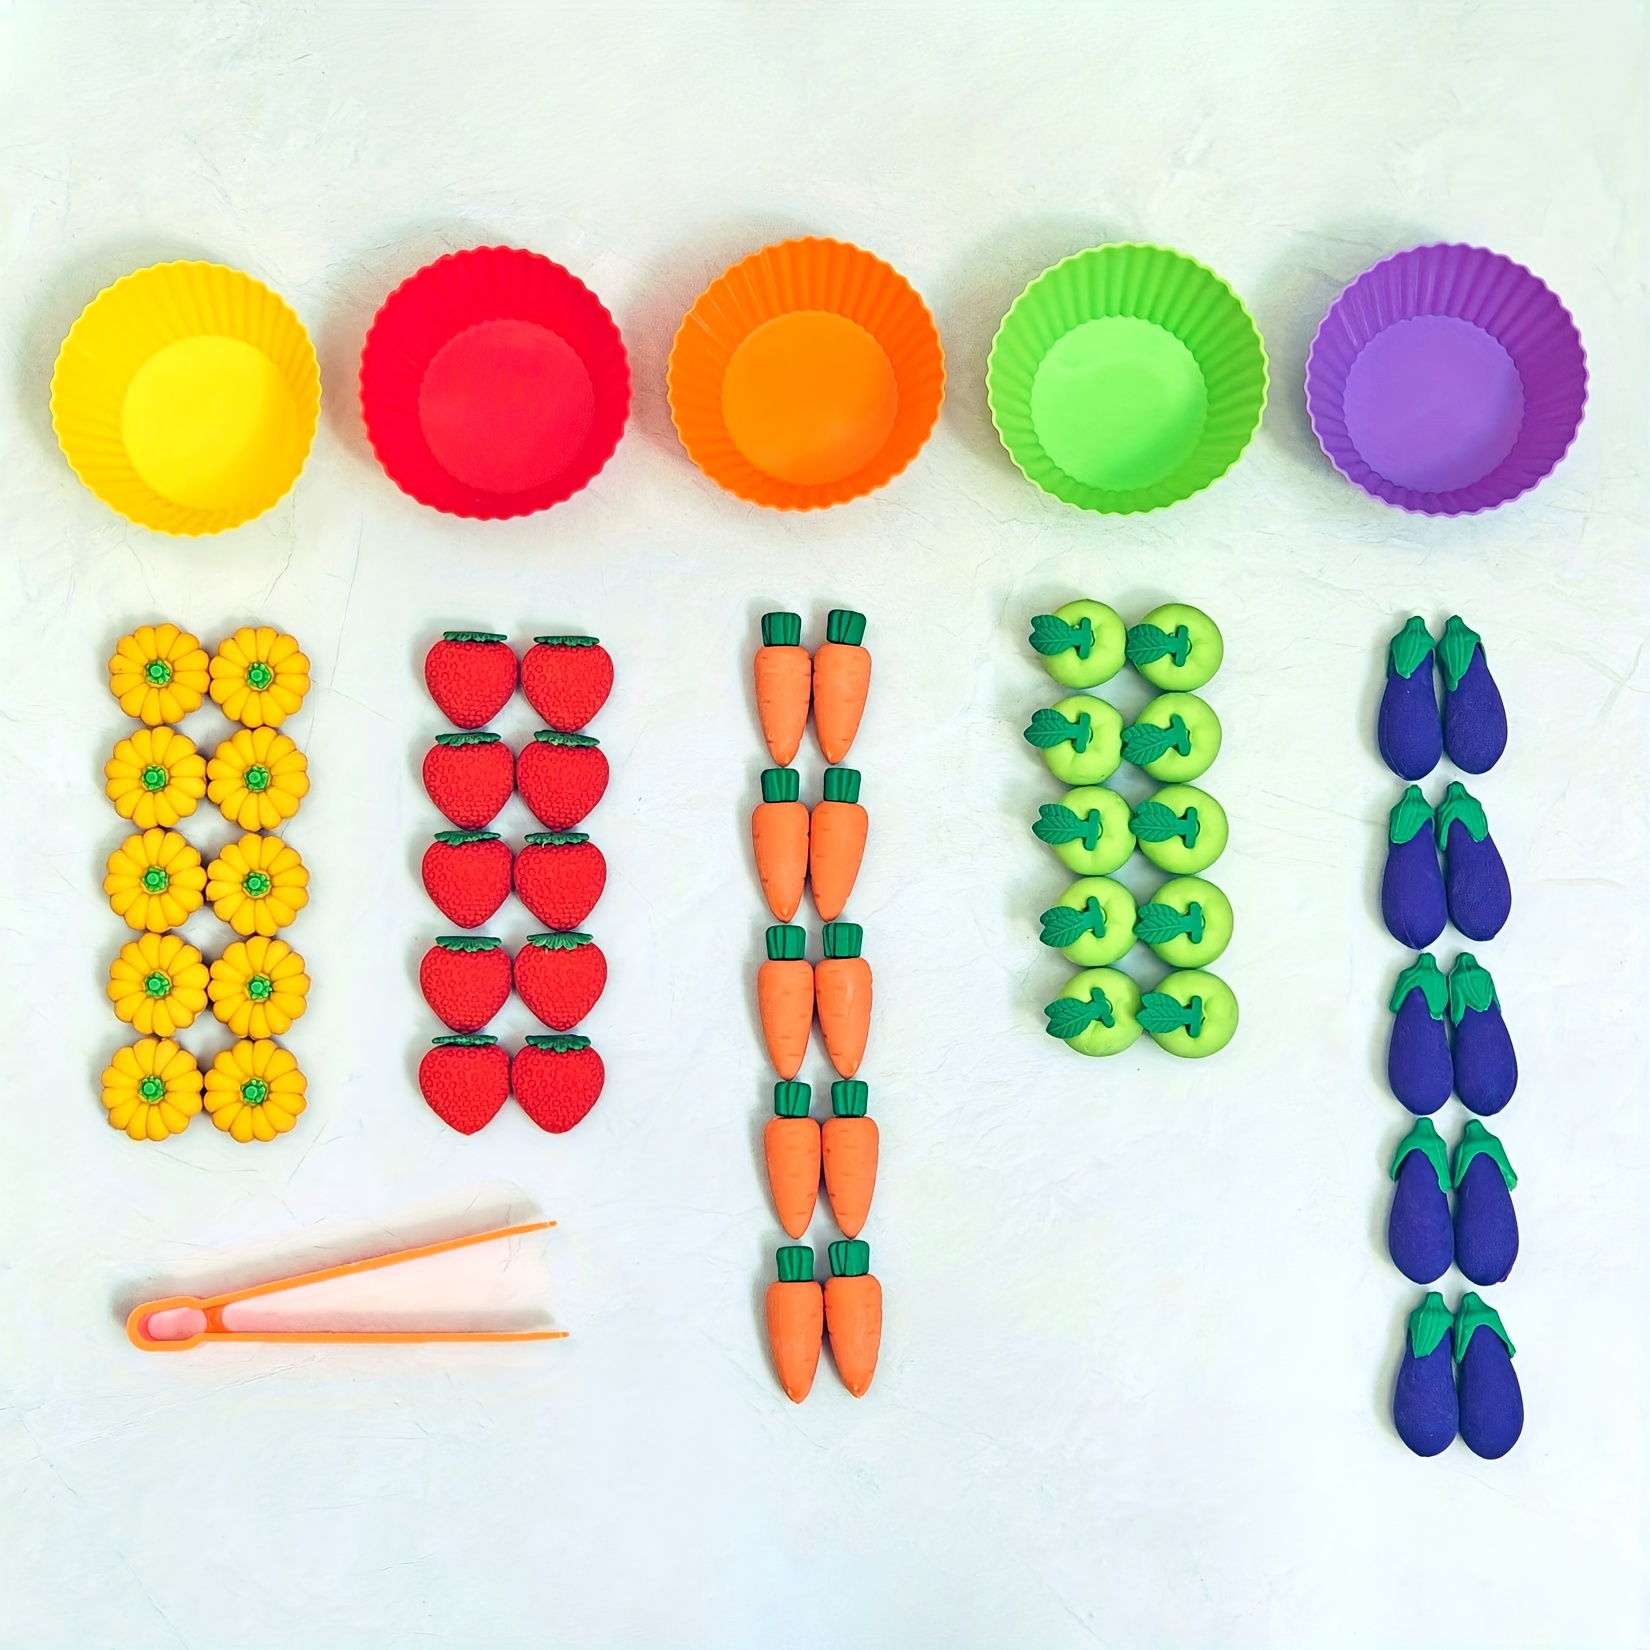 

50pcs Montessori Vegetable Sorting And Counting Educational Toy Set, Color Matching Game, Motor Skills Development Toys Christmas Gift